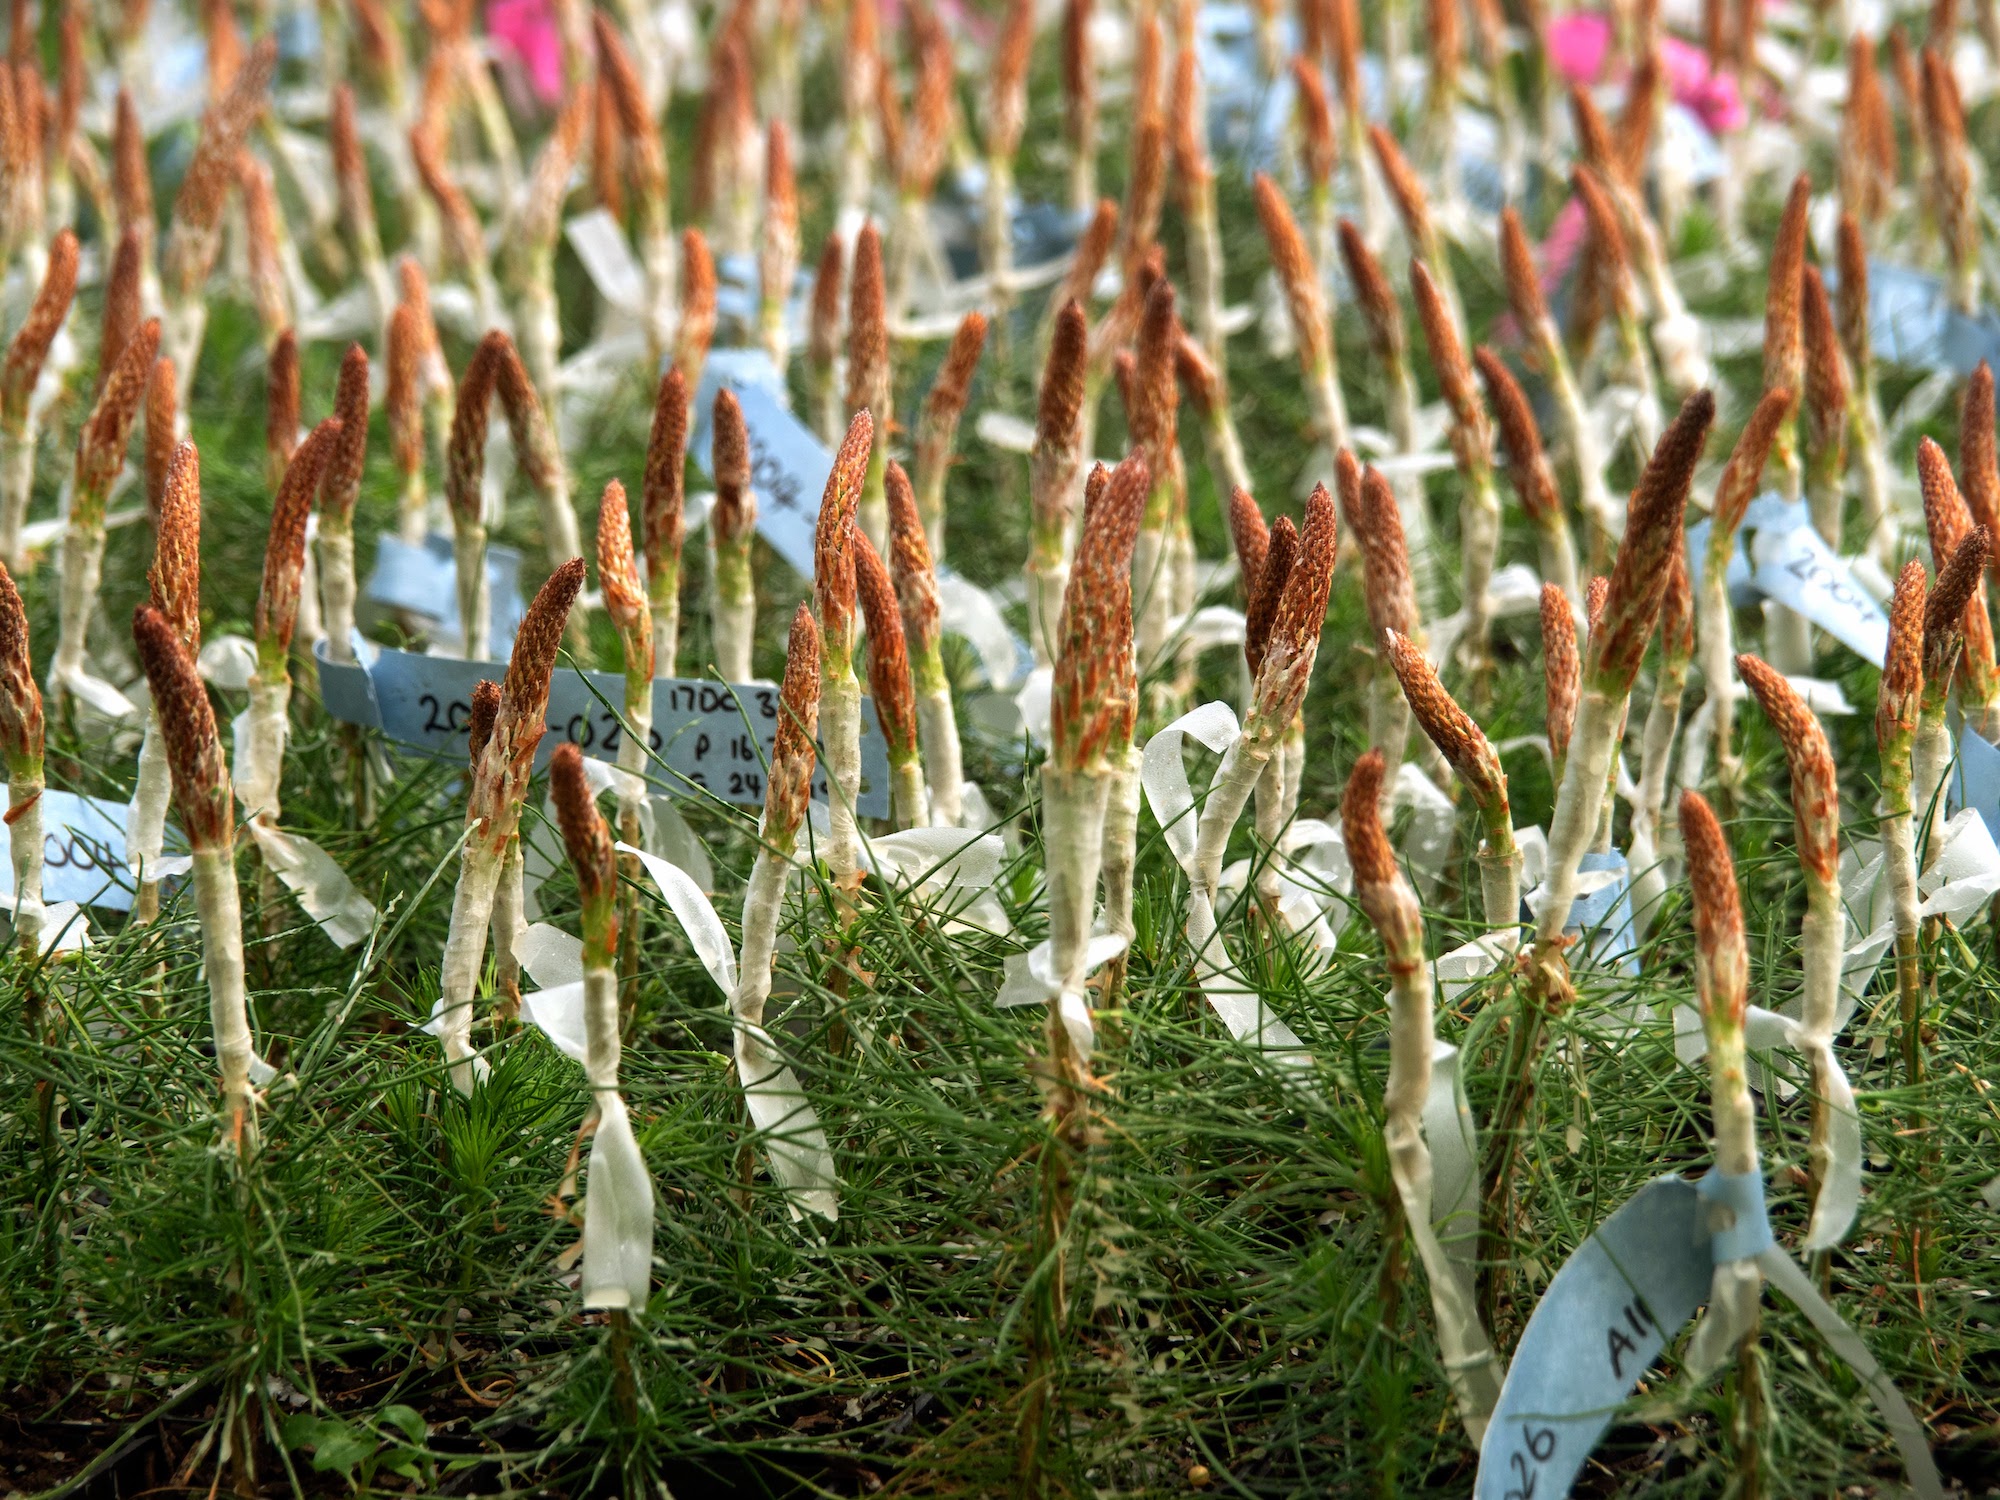 Dozens of grafted radiata pine plants, ready to establish in a seed orchard.